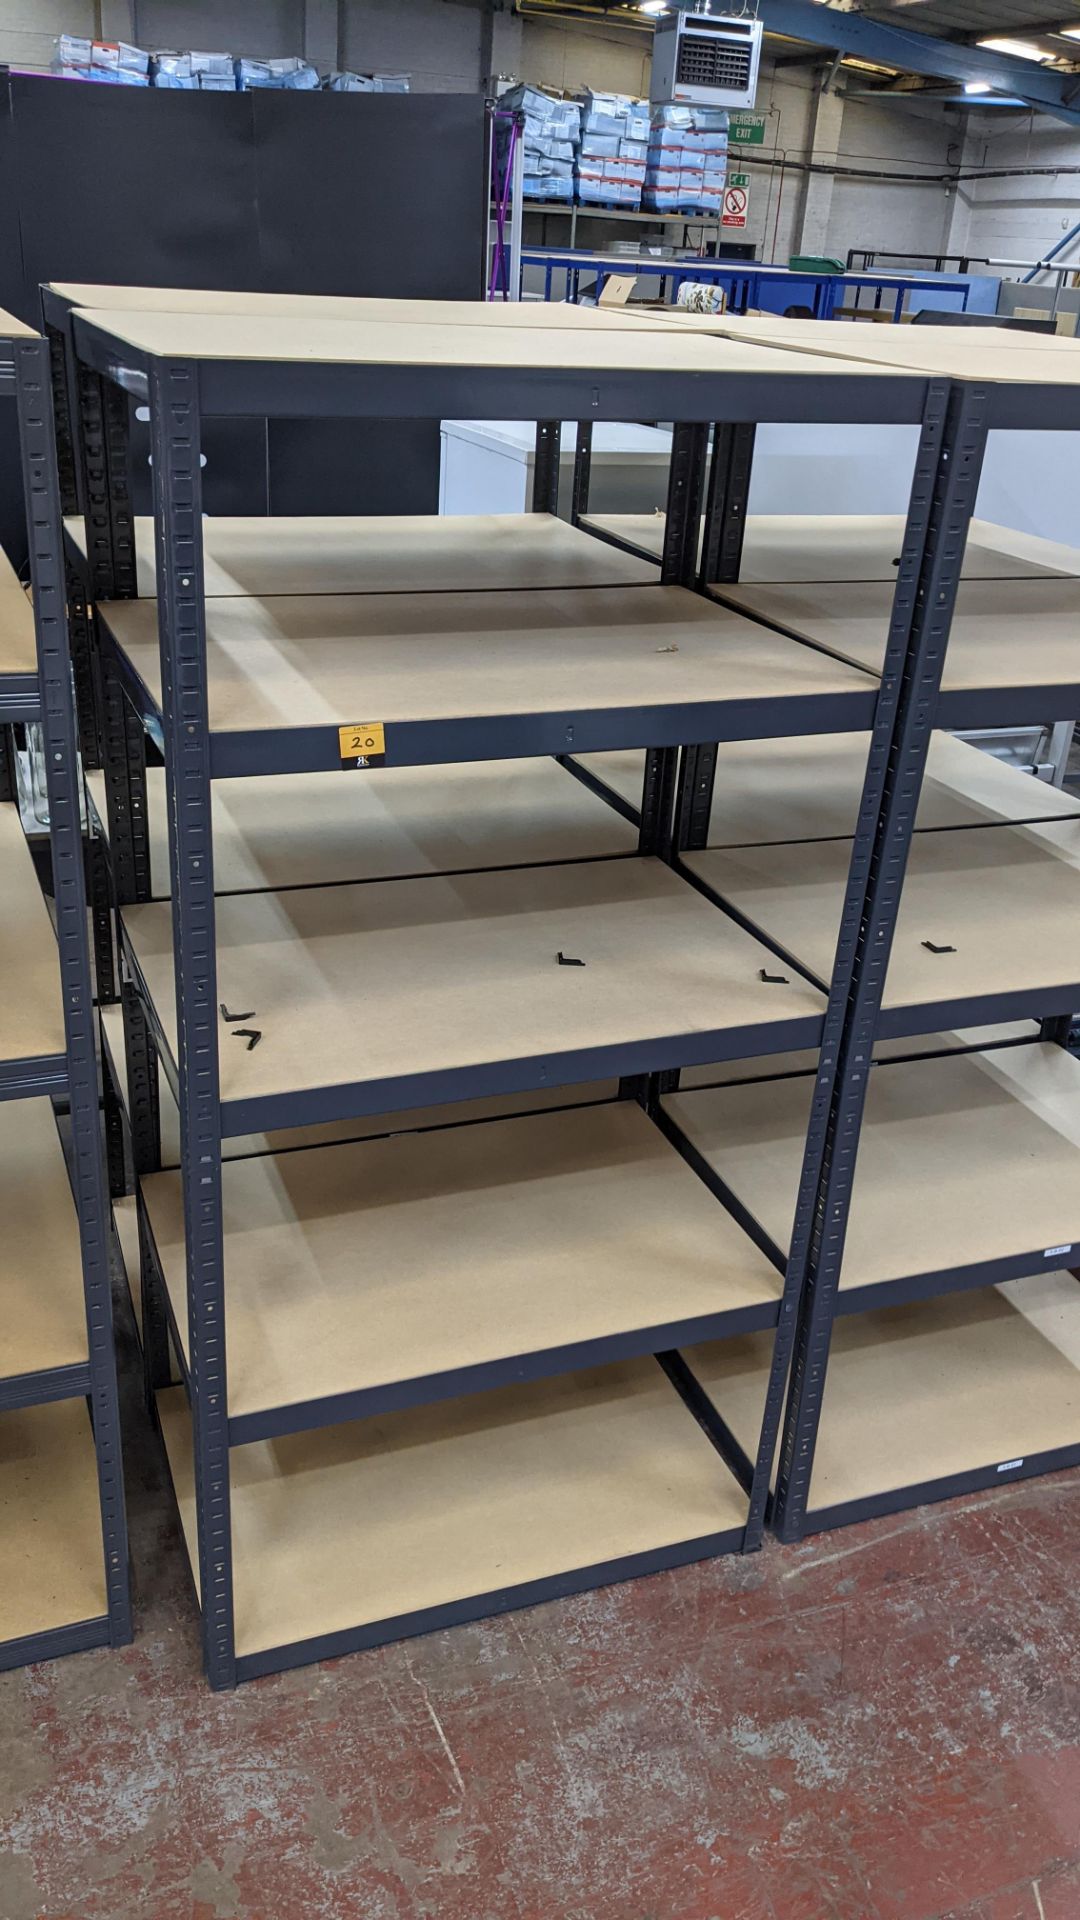 4 freestanding bays of bolt-free racking, each bay measuring approximately 900mm x 600mm x 1800mm, e - Image 4 of 7